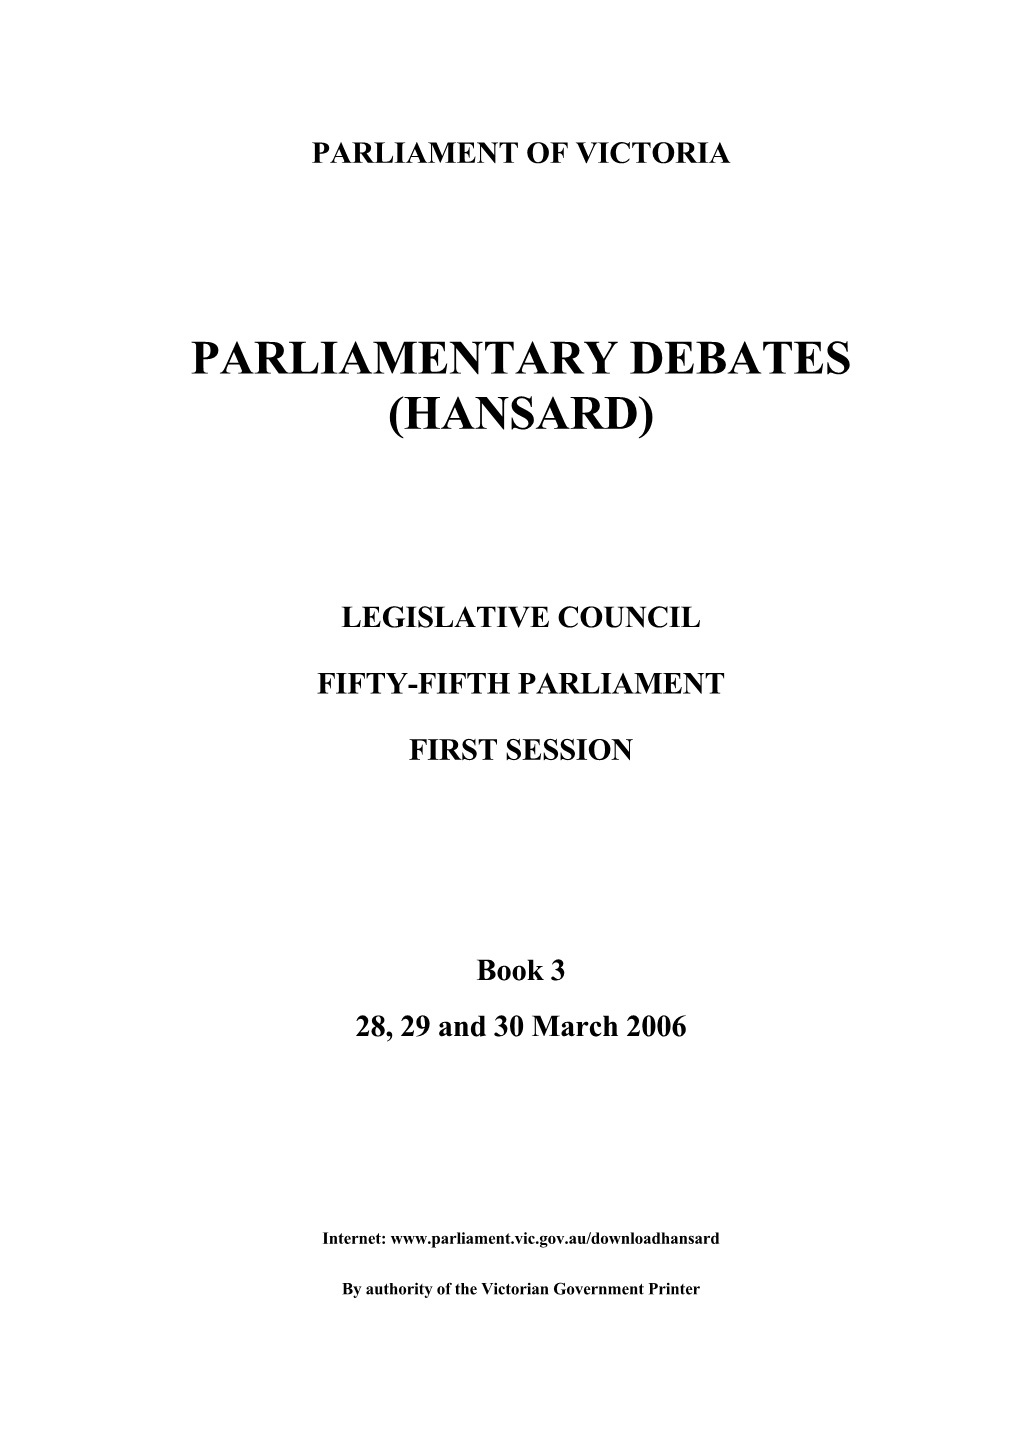 Book 3 28, 29 and 30 March 2006